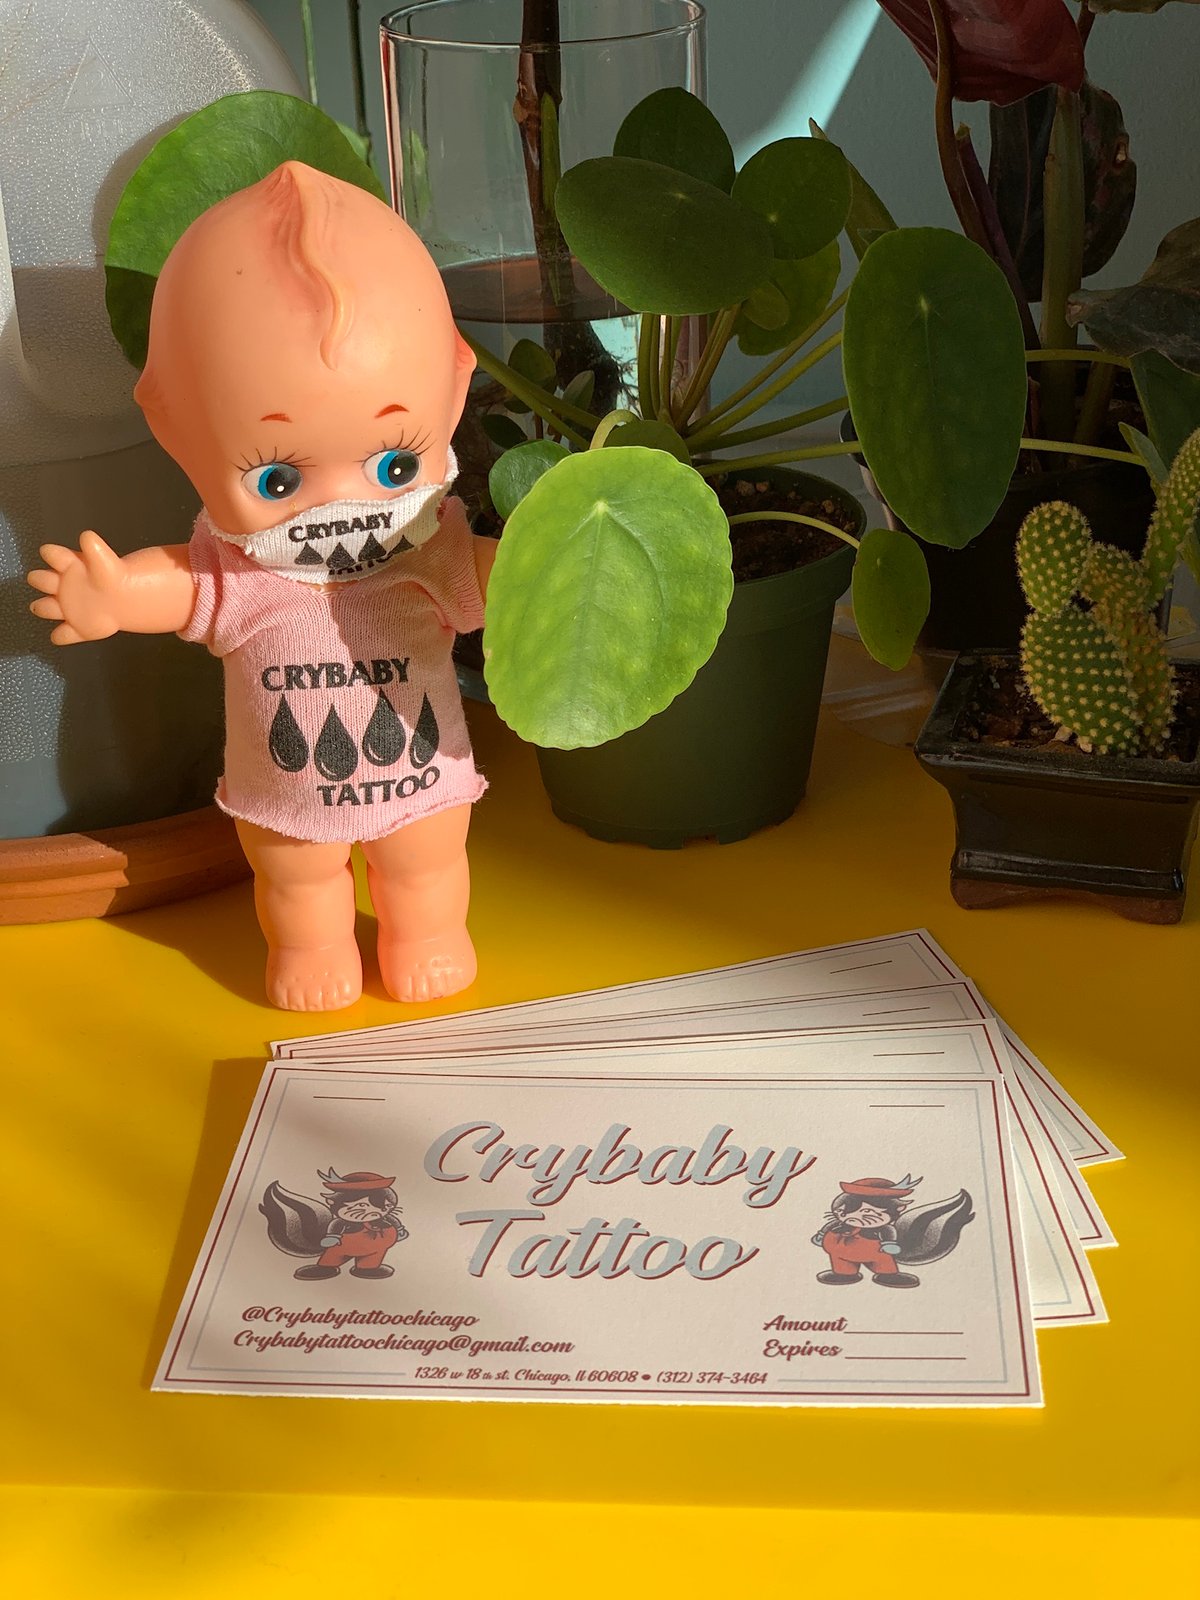 My alternative take on the cry baby tattoo : r/LilPeep